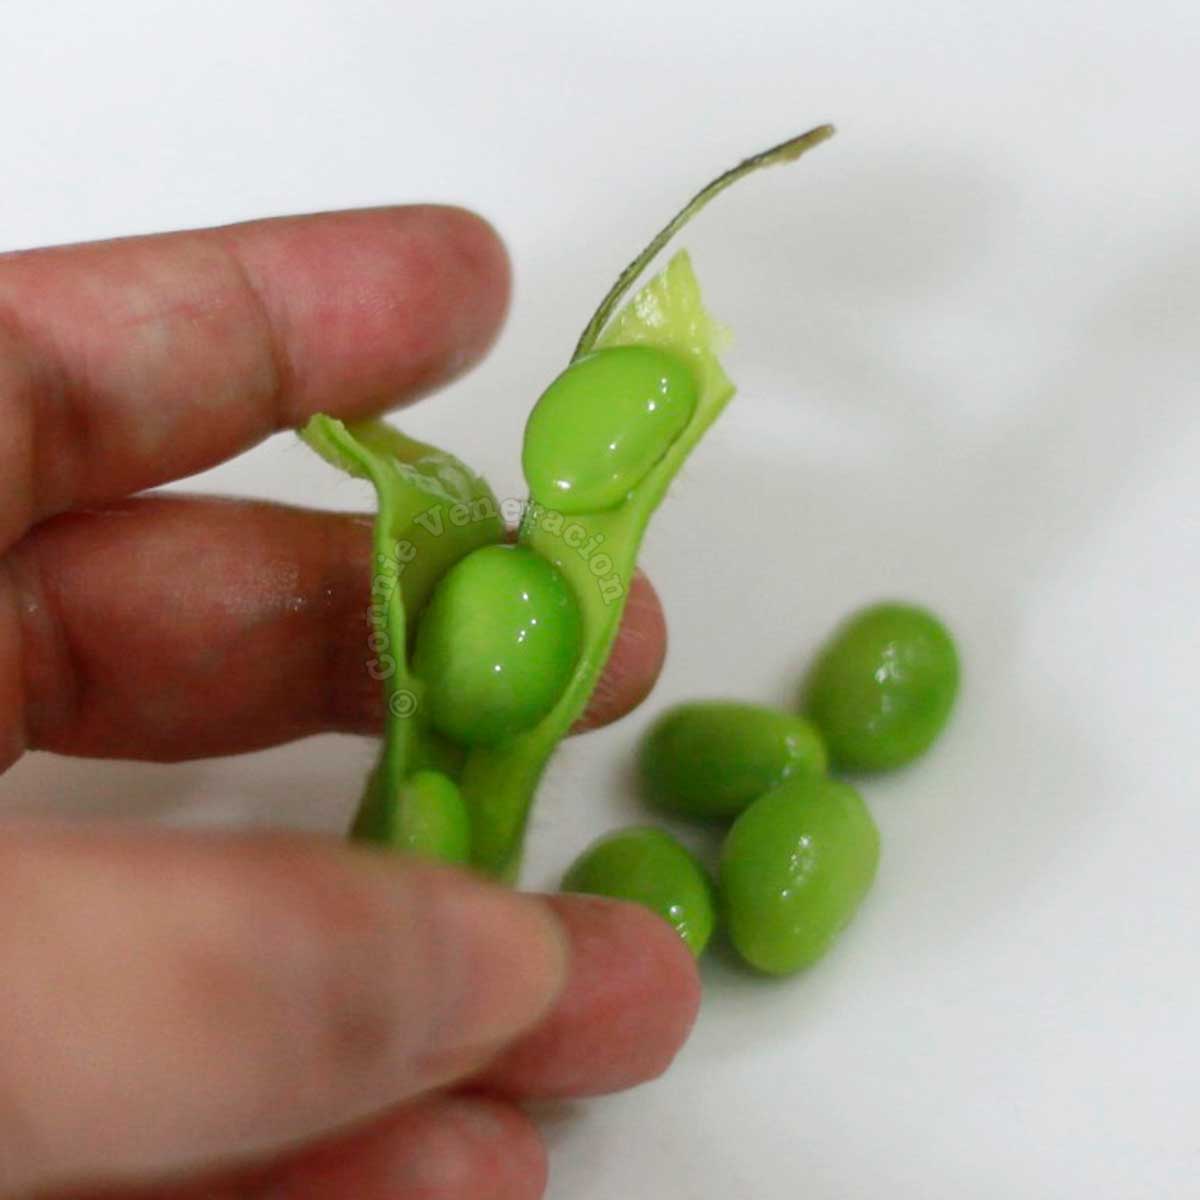 Cooked fresh edamame (fresh soy beans in pods)